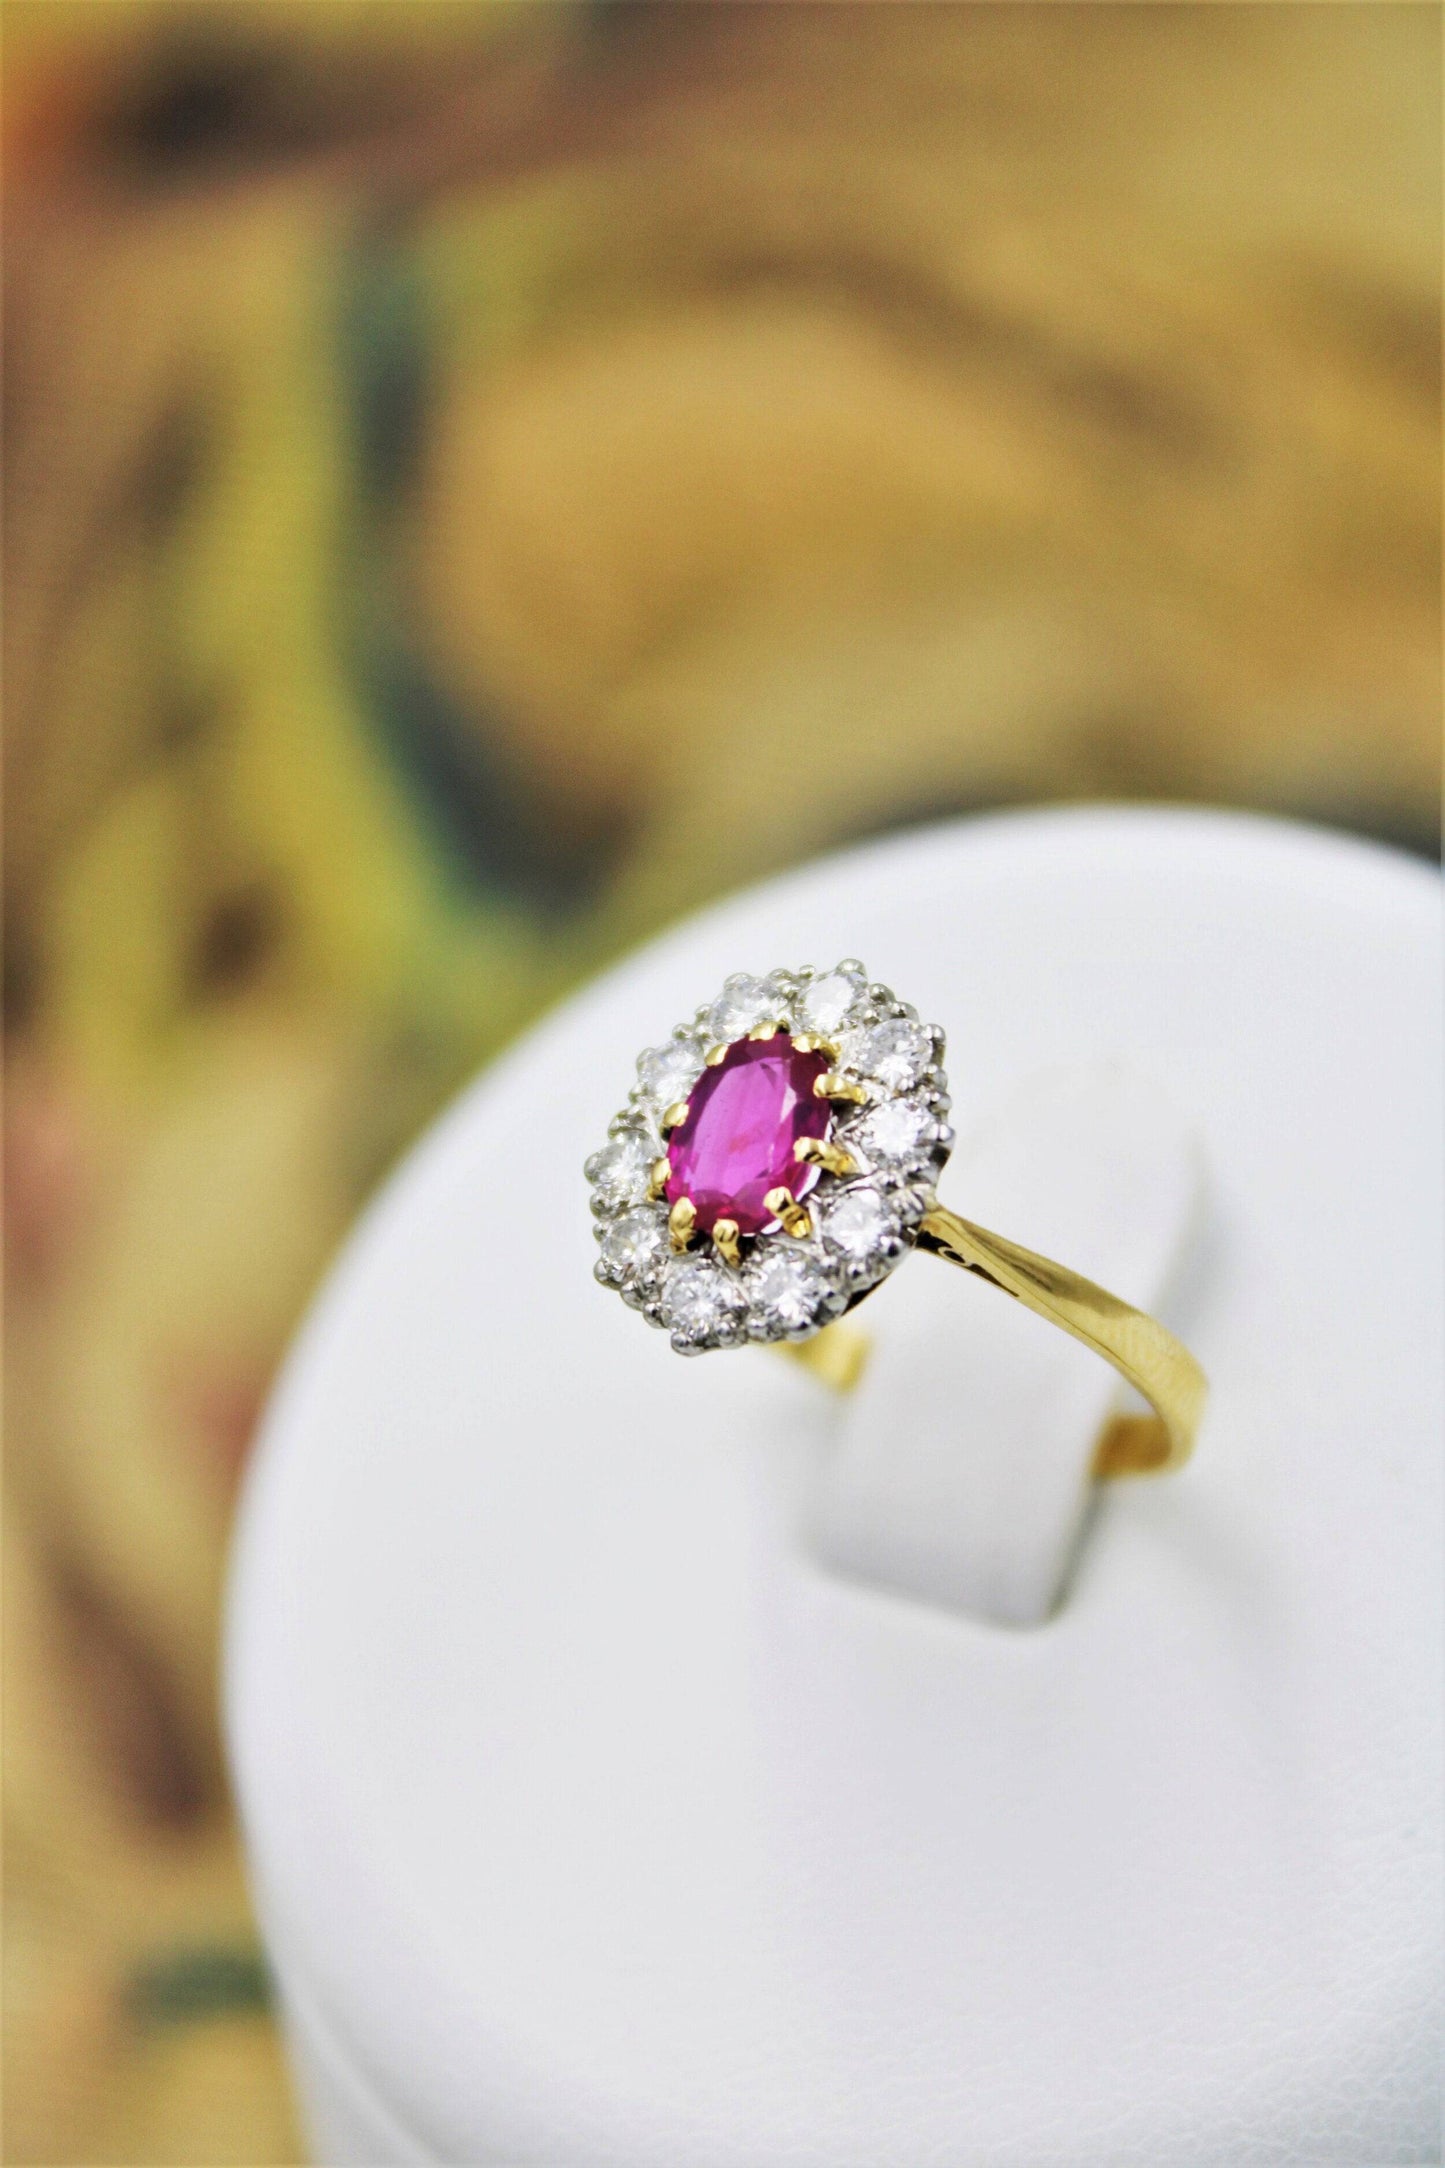 A very fine Oval Natural Ruby & Diamond Cluster Ring mounted in 18ct Yellow Gold, Circa 1955 - Robin Haydock Antiques